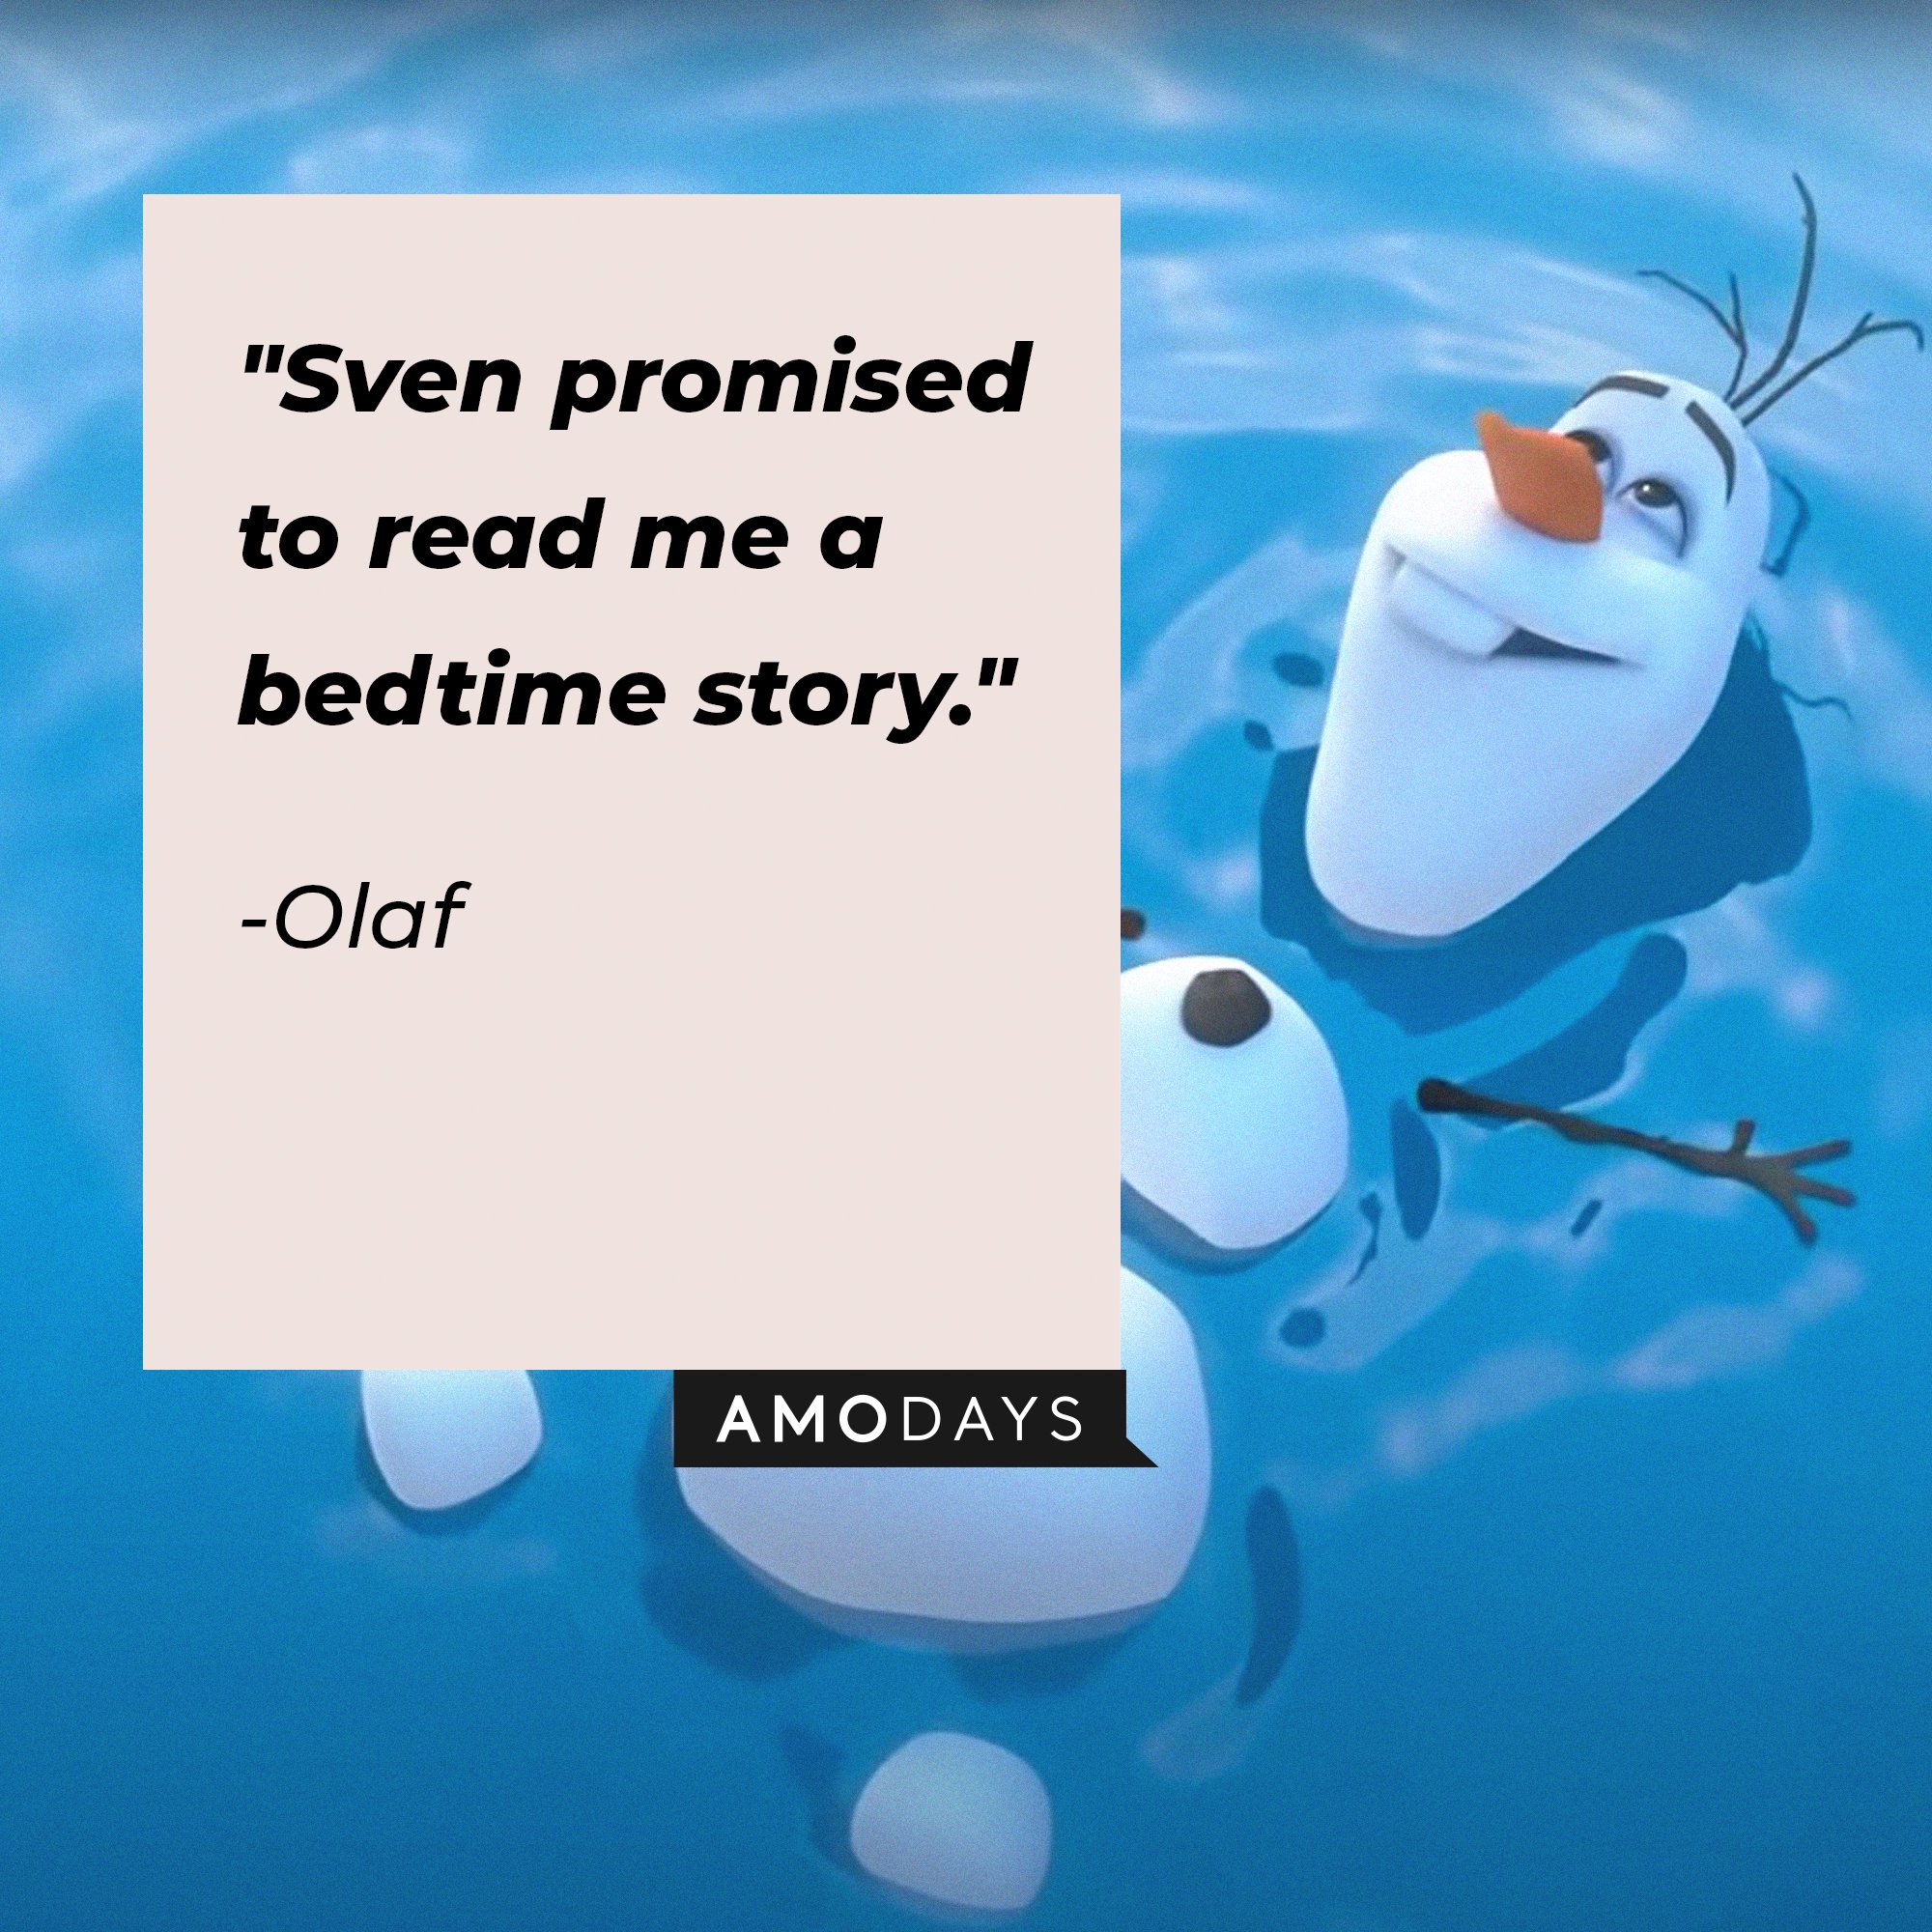 Olaf’s quote: "Sven promised to read me a bedtime story." | Image: AmoDays